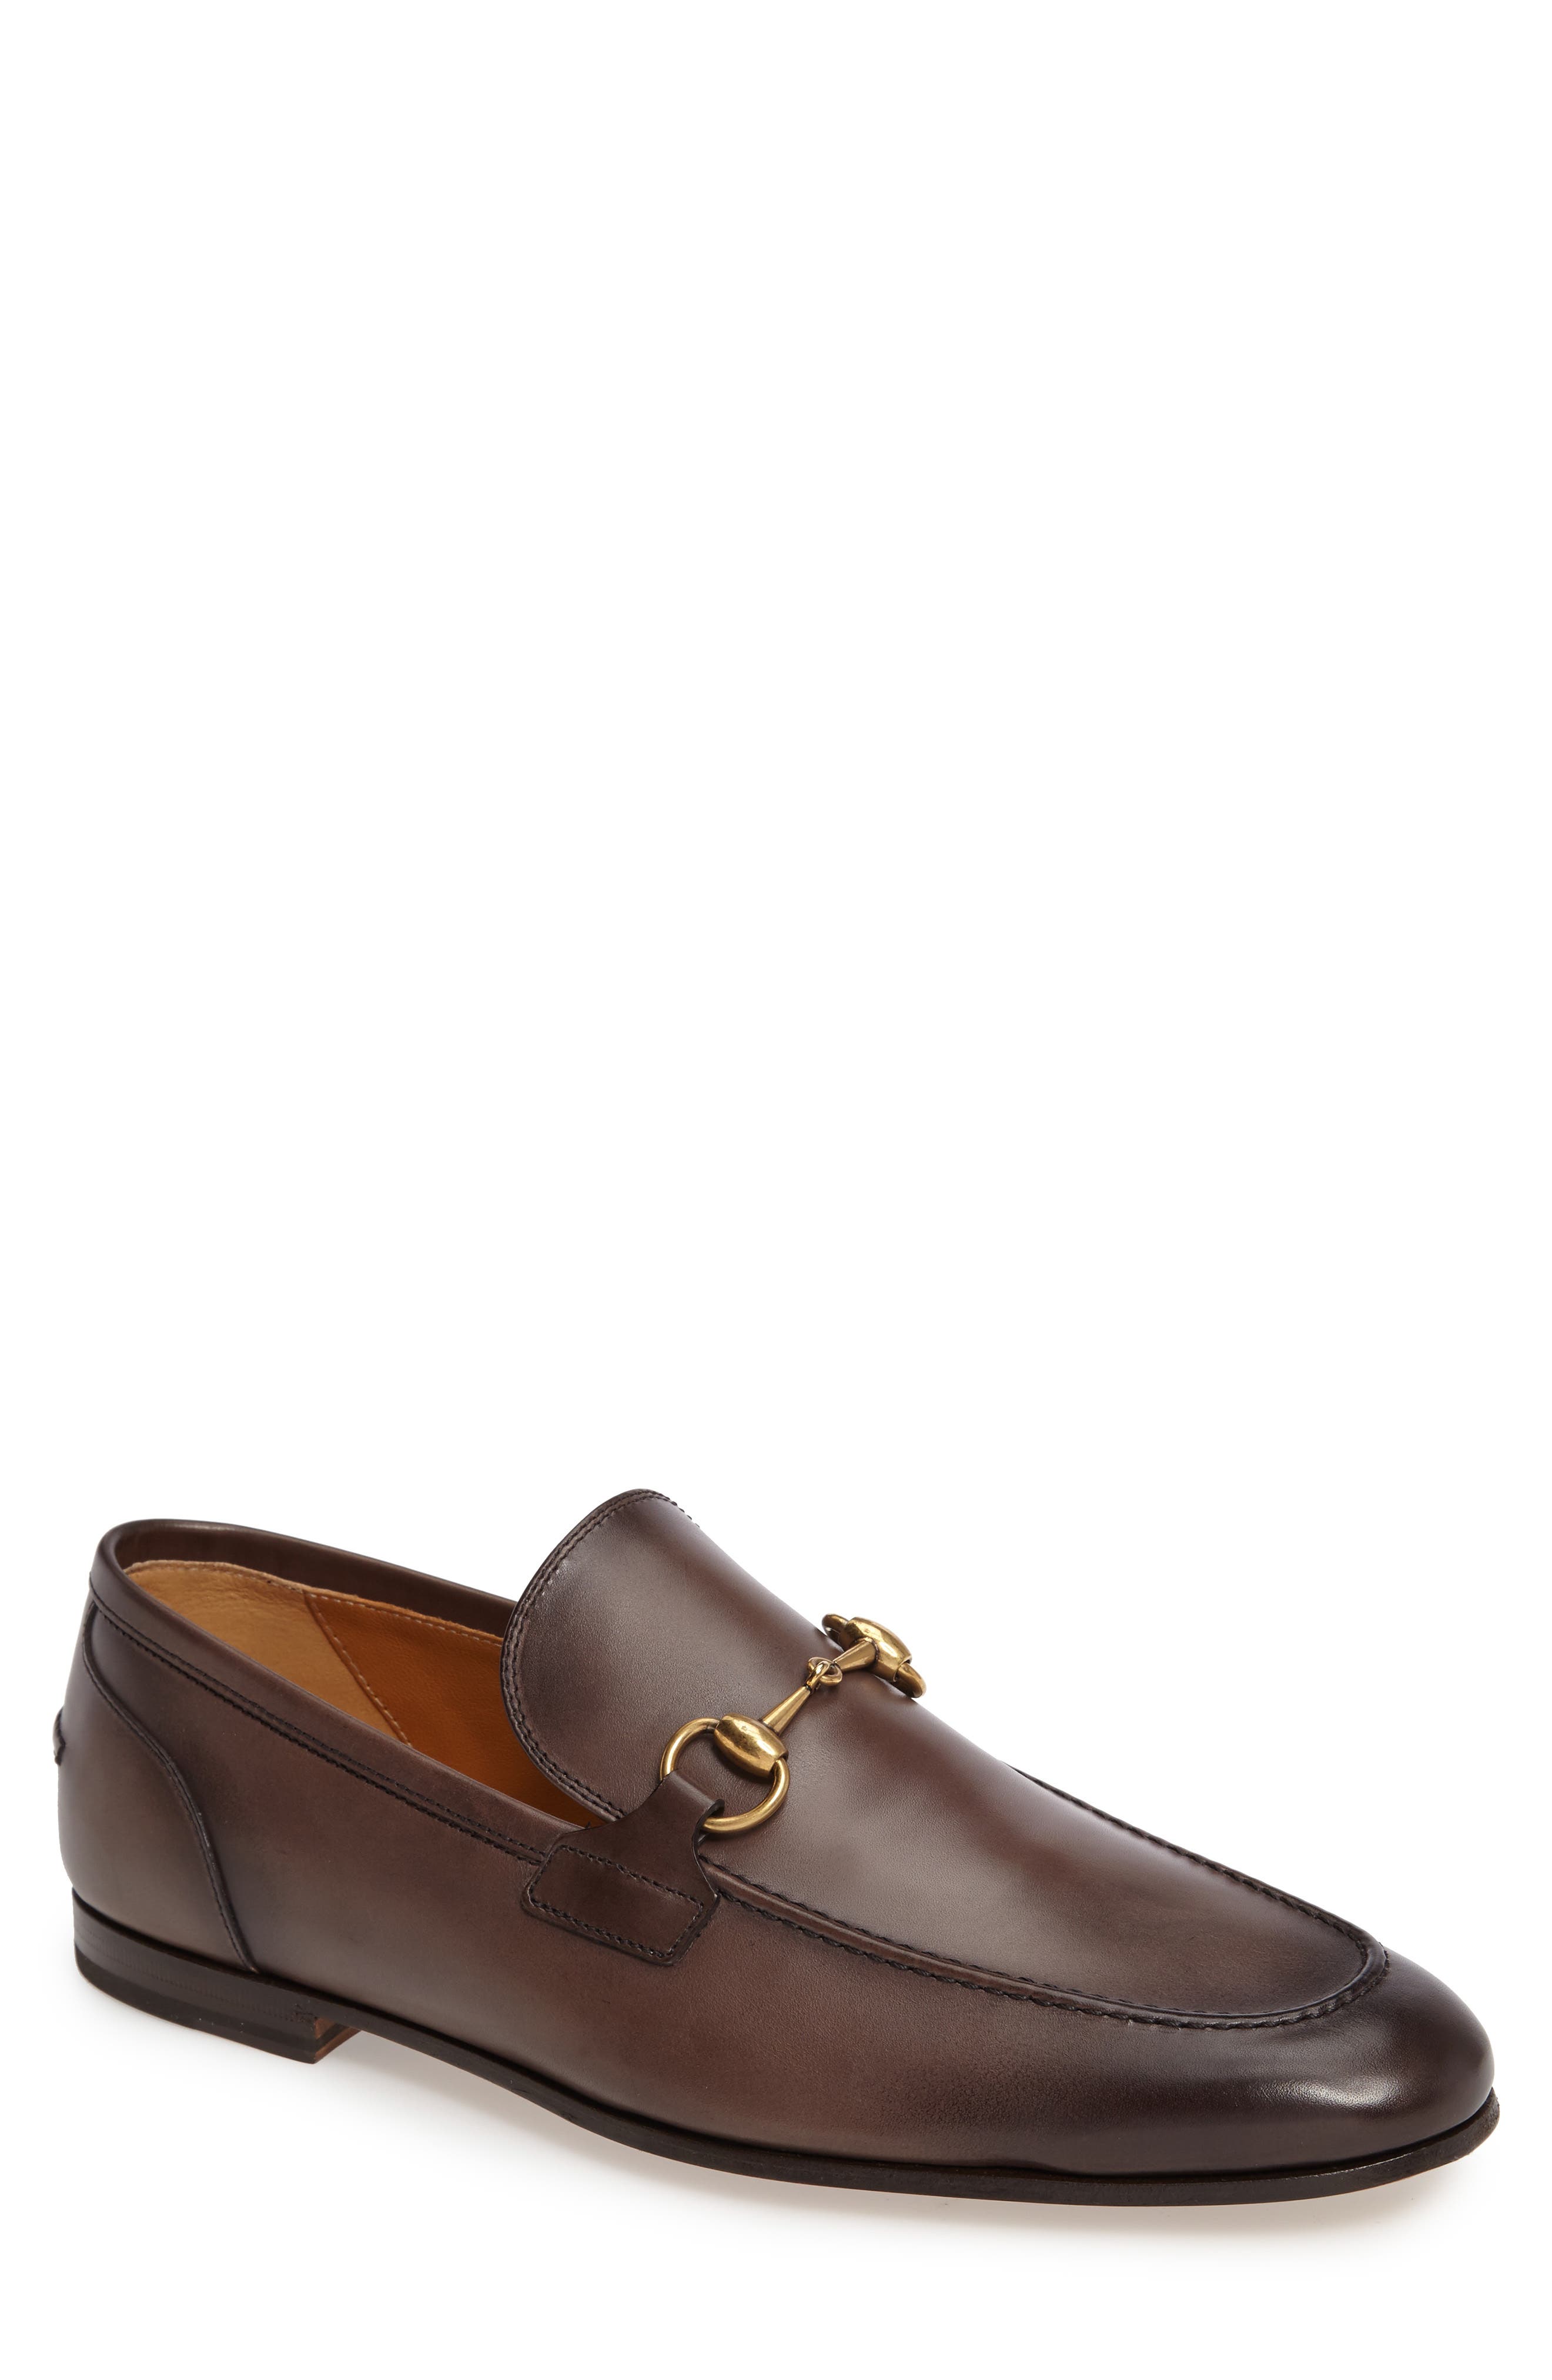 Egnet stamme Tak Brown Gucci Loafers For Men Latvia, SAVE 52% - mpgc.net